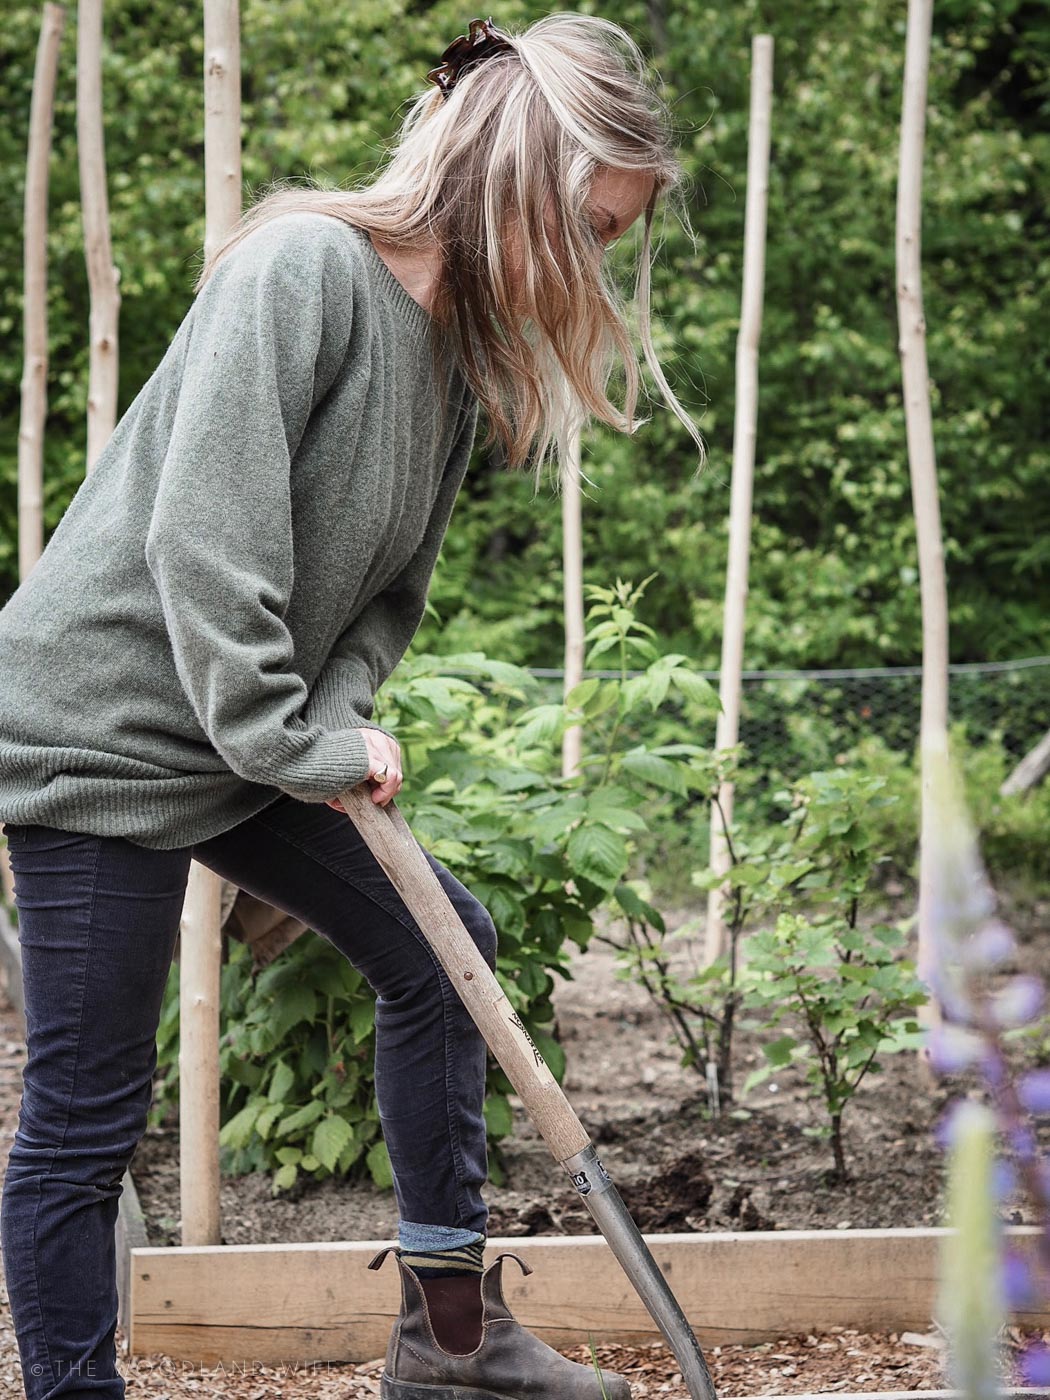 The Woodland Wife - Woodland Vegetable Garden - Grow Your Own - Celtic and Co - Womens Knitwear